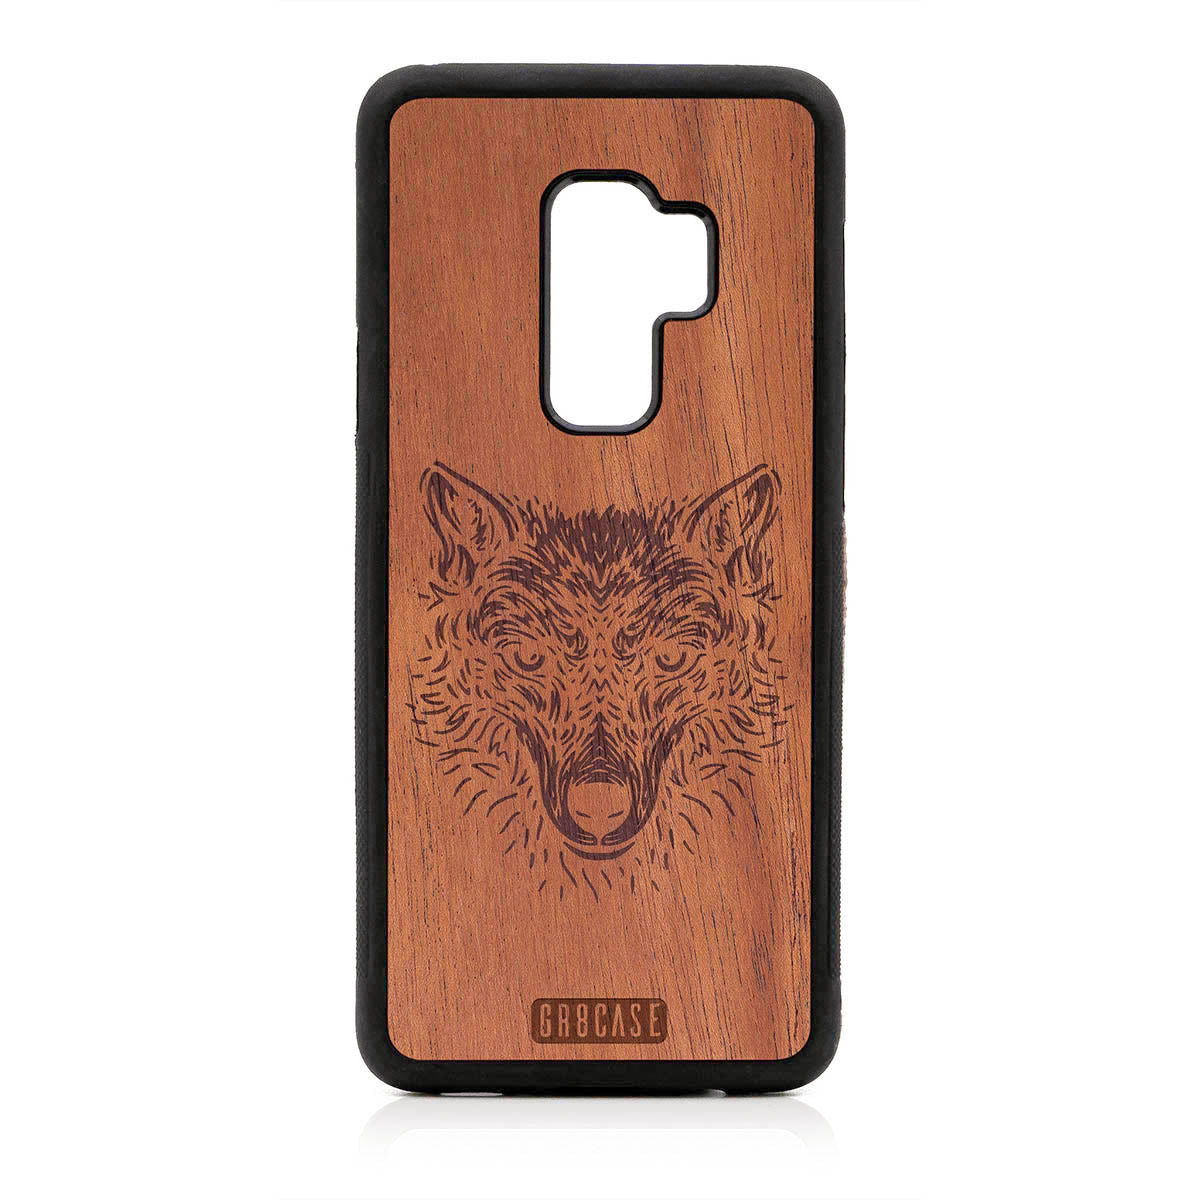 Furry Wolf Design Wood Case For Samsung Galaxy S9 Plus